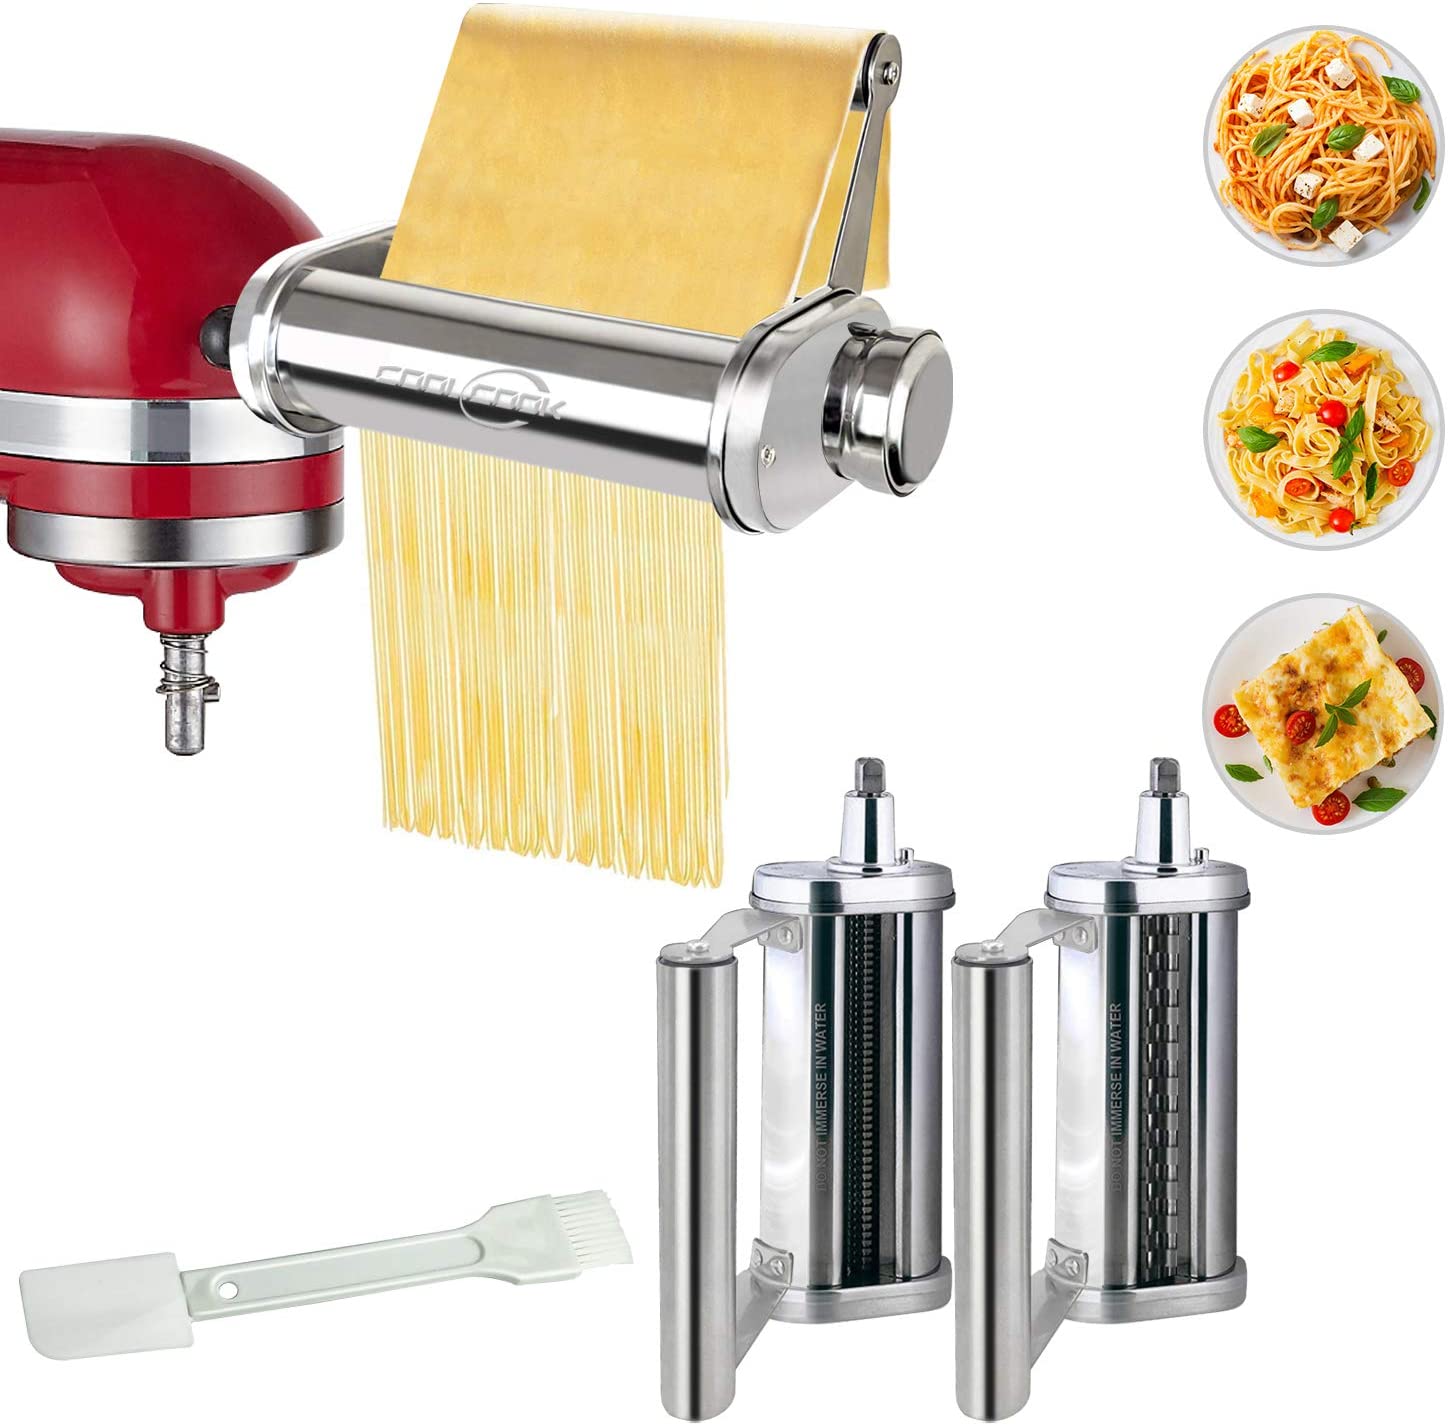 Coolcook Pasta Maker Attachment Set for KitchenAid Stand Mixer with Unique Roller, Pasta Sheet Roller, Spaghetti Cutter, Fettuccine Cutter, Stainless Steel